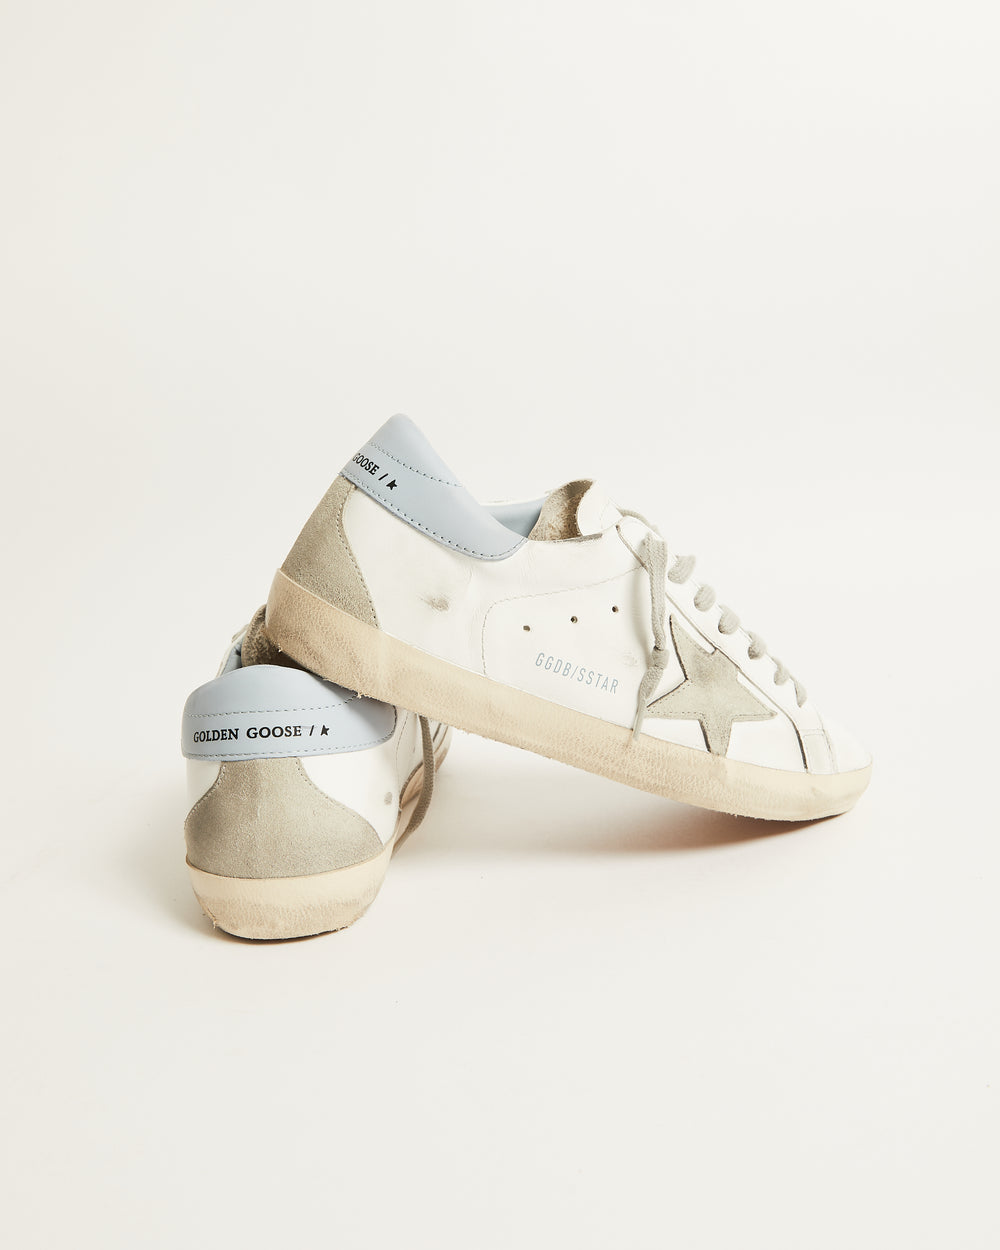 Super Star in White Leather w/ Suede Star and Powder Blur Heel Tab